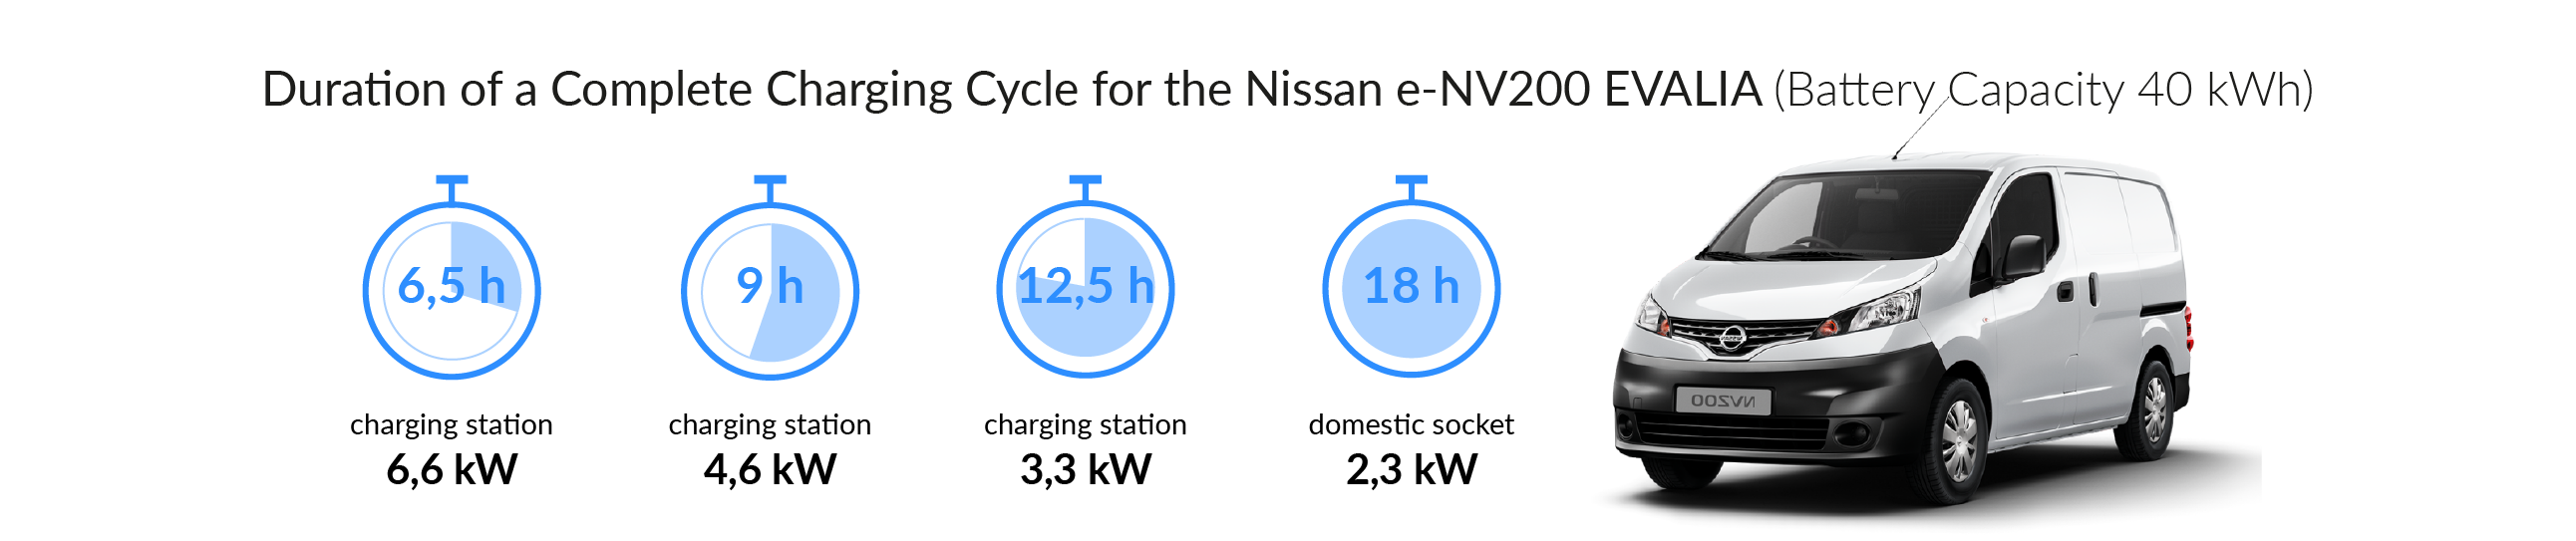 Charging time for your NISSAN EVALIA e-NV200